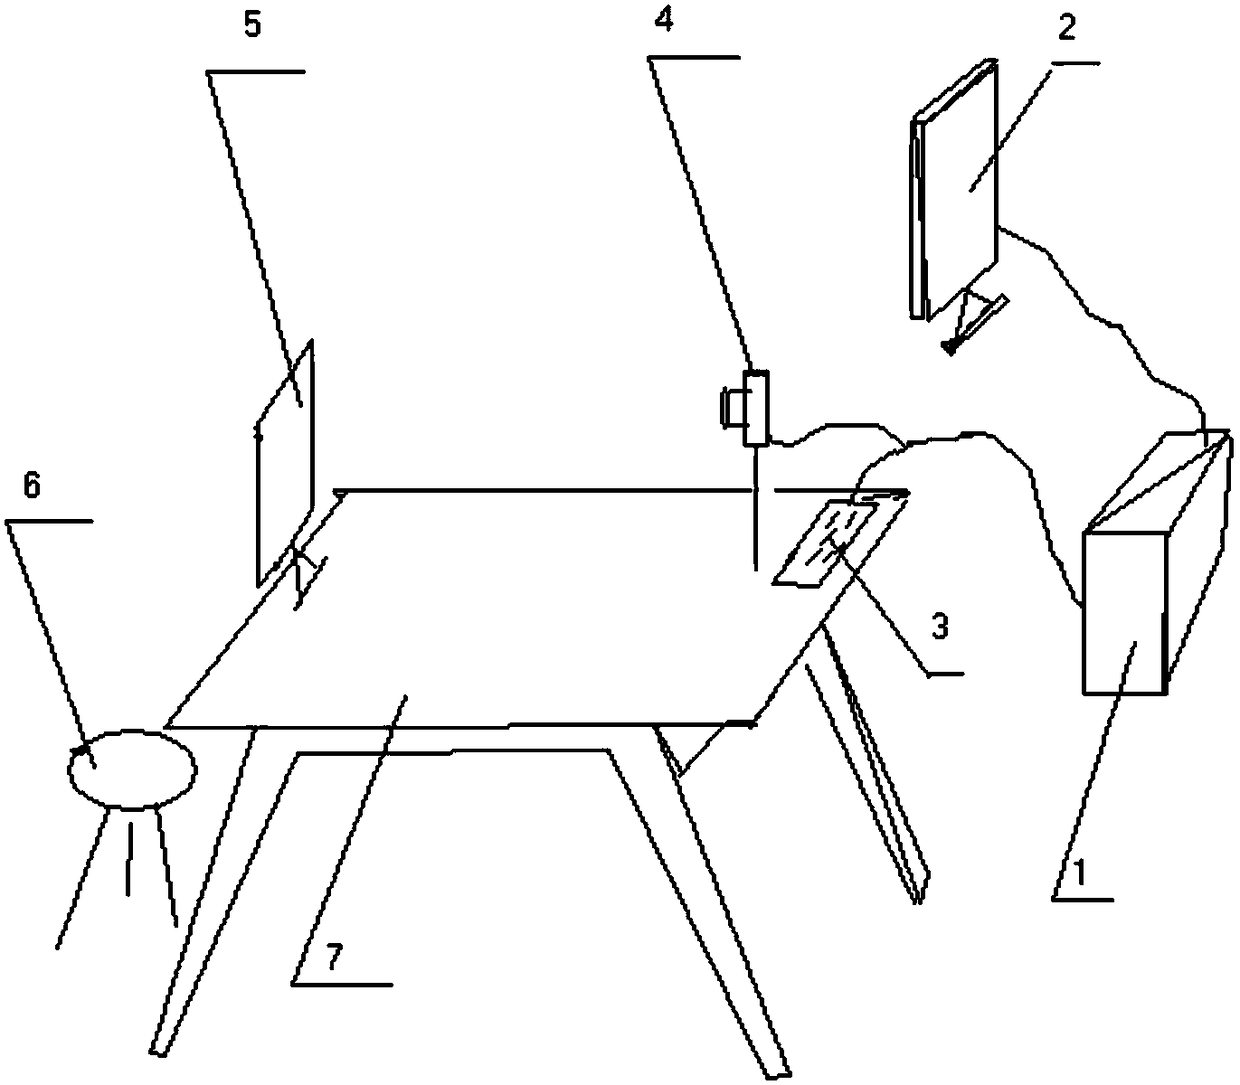 A computer-based device and method for detecting eye movement distance and binocular movement consistency deviation